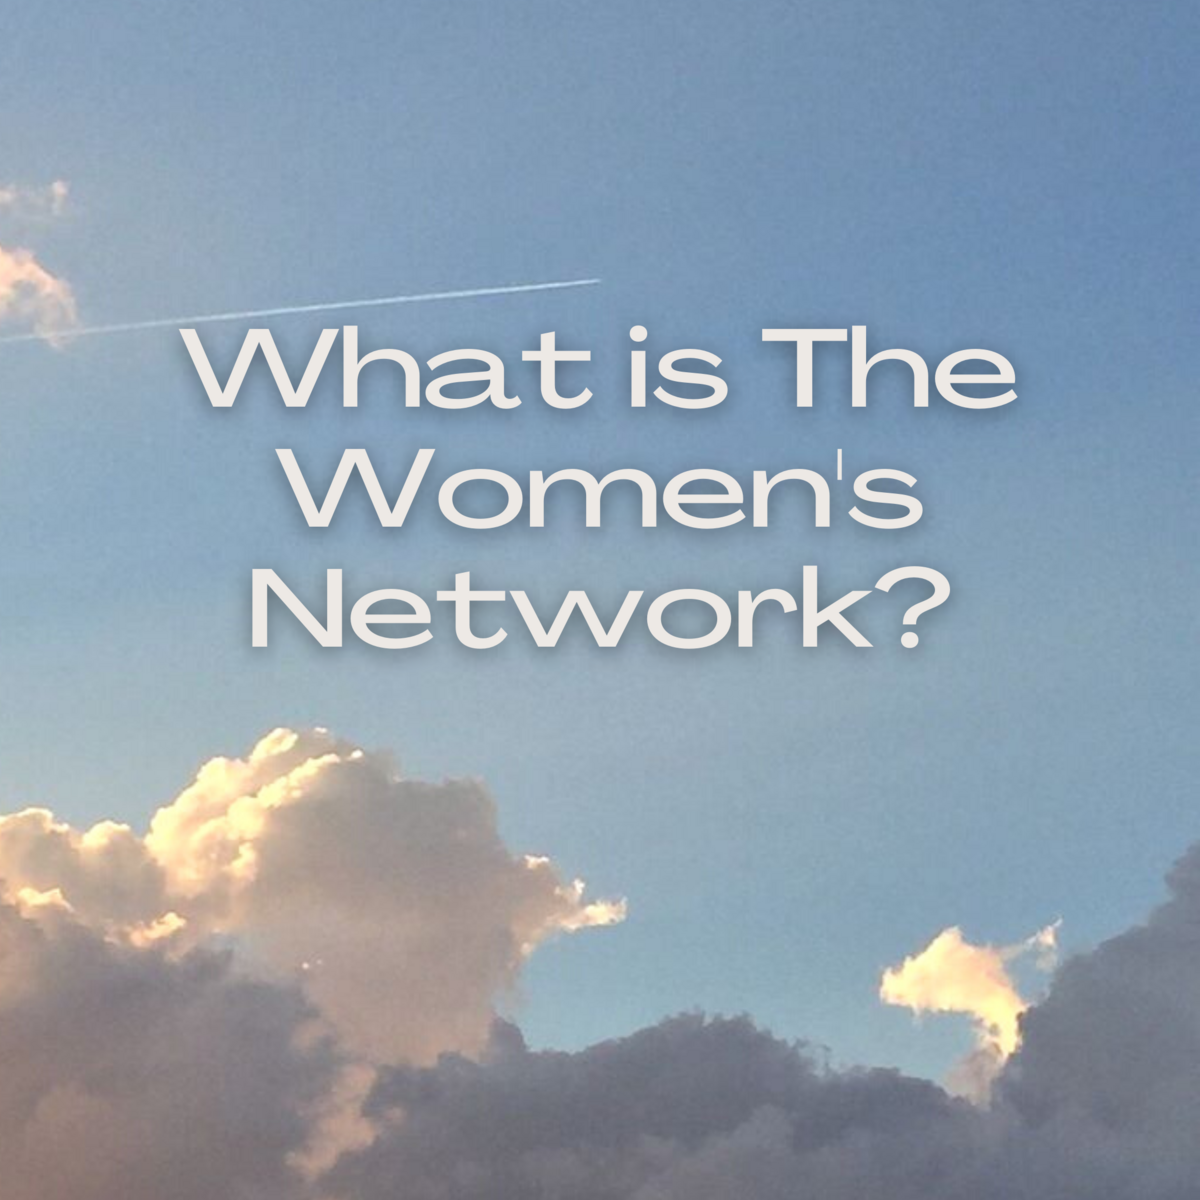 What is The Women's Network